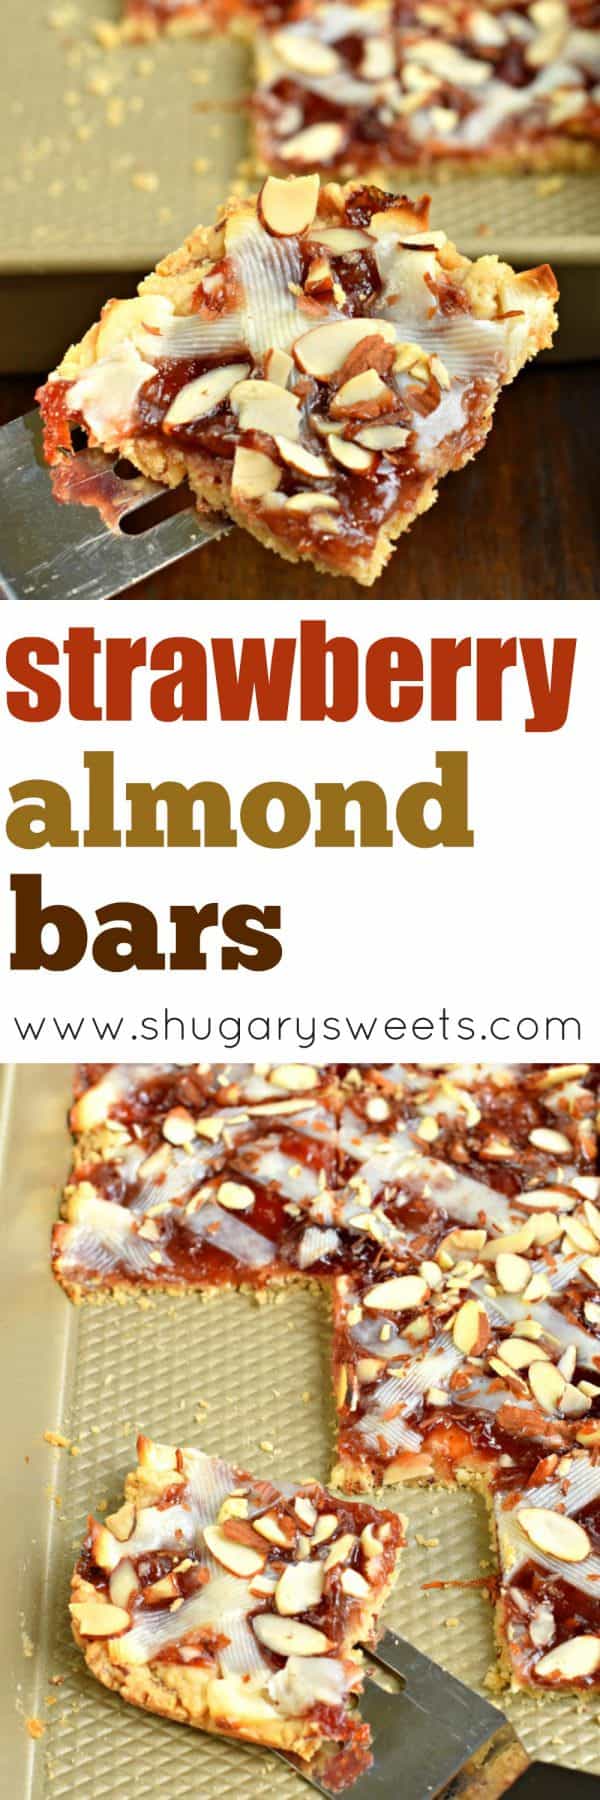 Strawberry Almond Bars with a nutty crust, sweet strawberry filling, and a light cheesecake topping. Perfect for holidays or weekend brunches!